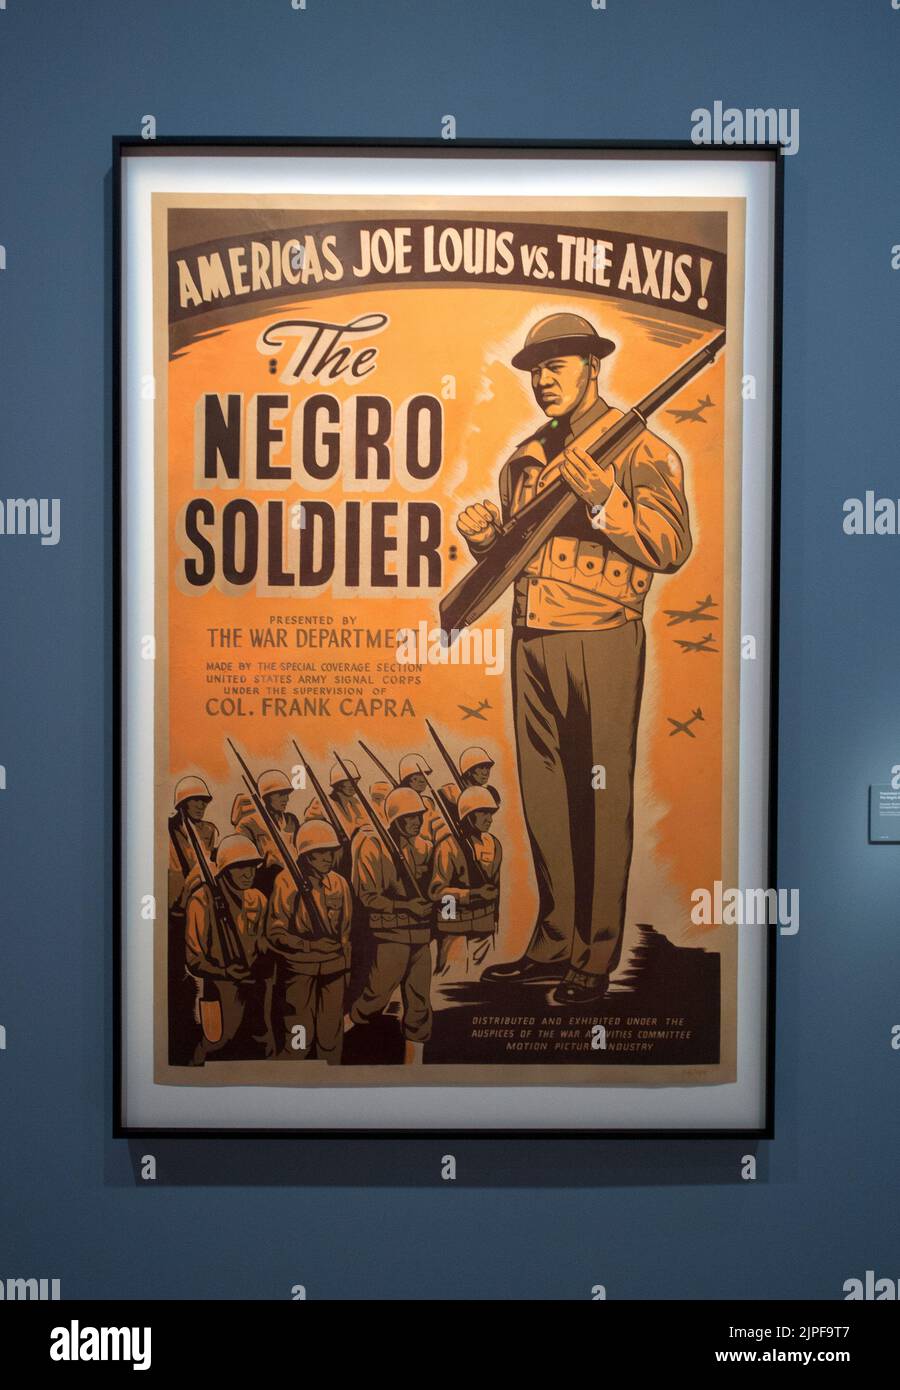 Vintage movie poster on display in the exhibtion 'Regeneration: Black Cinema' at the Academy Museum of Motion Pictures in Los Angeles, California Stock Photo